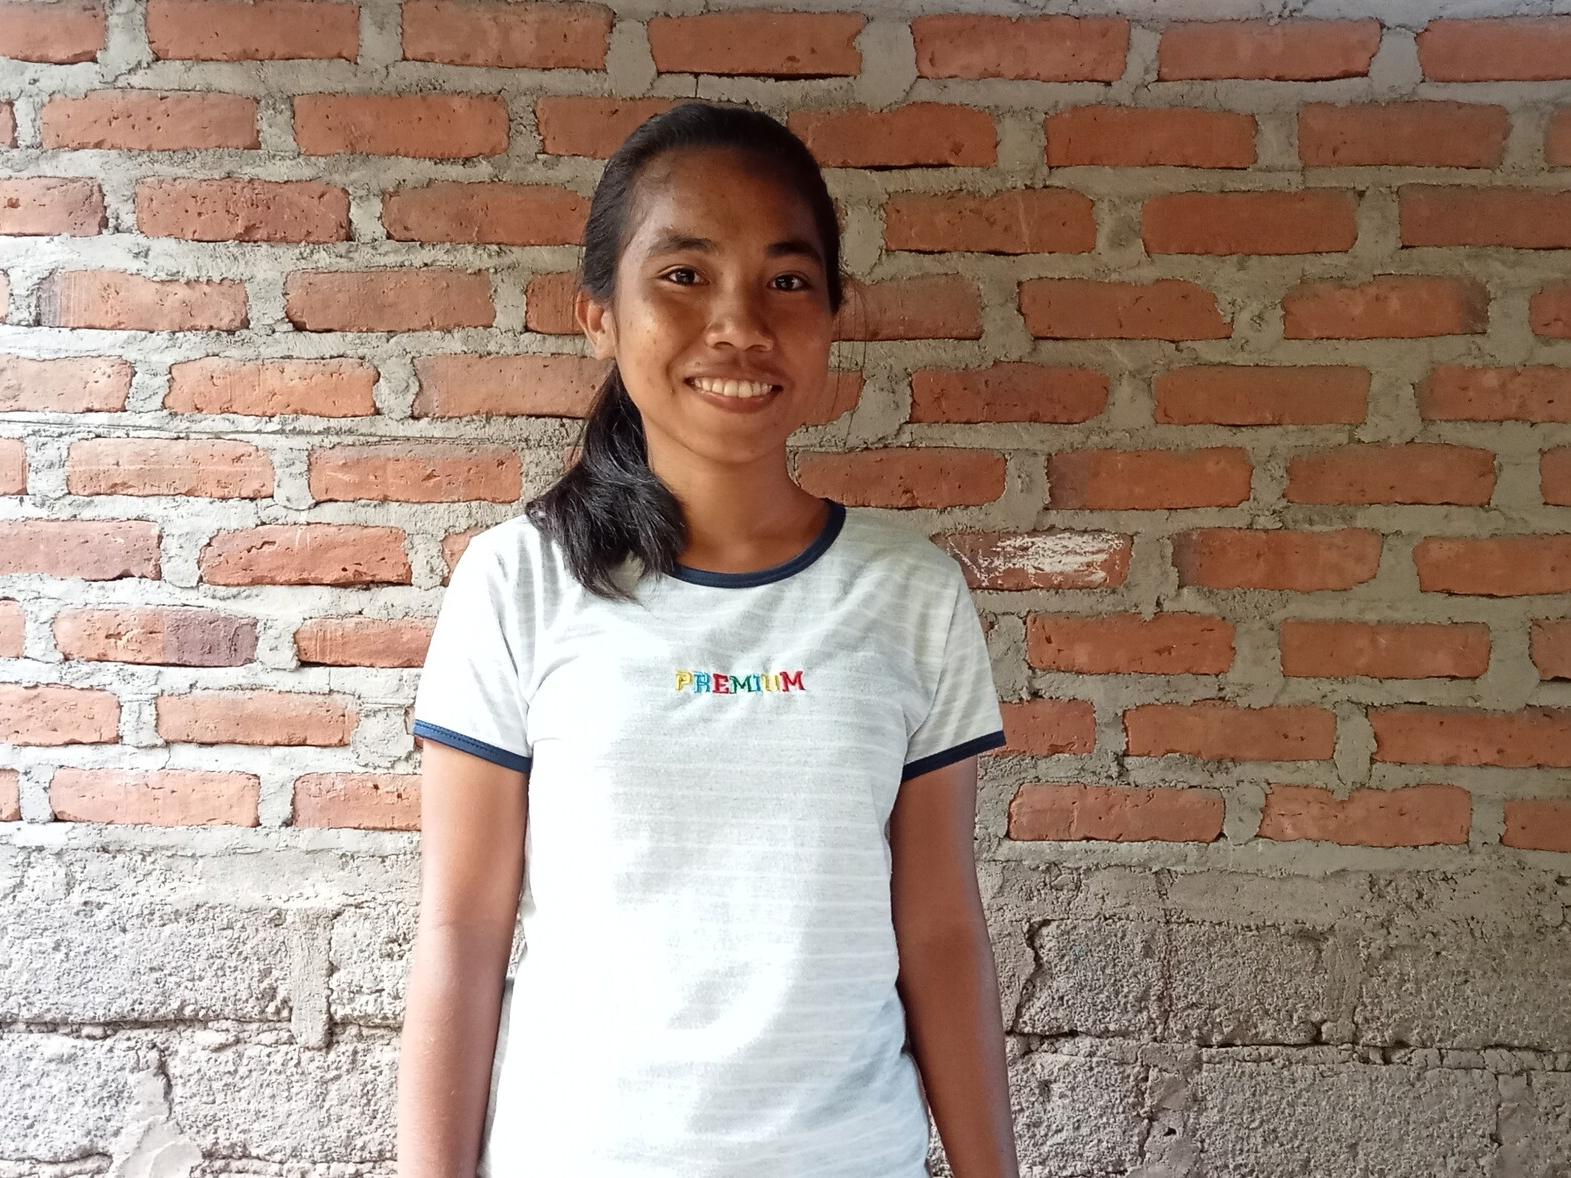 Margareta, 17, standing in front of a brick wall in Indonesia smiling at the camera